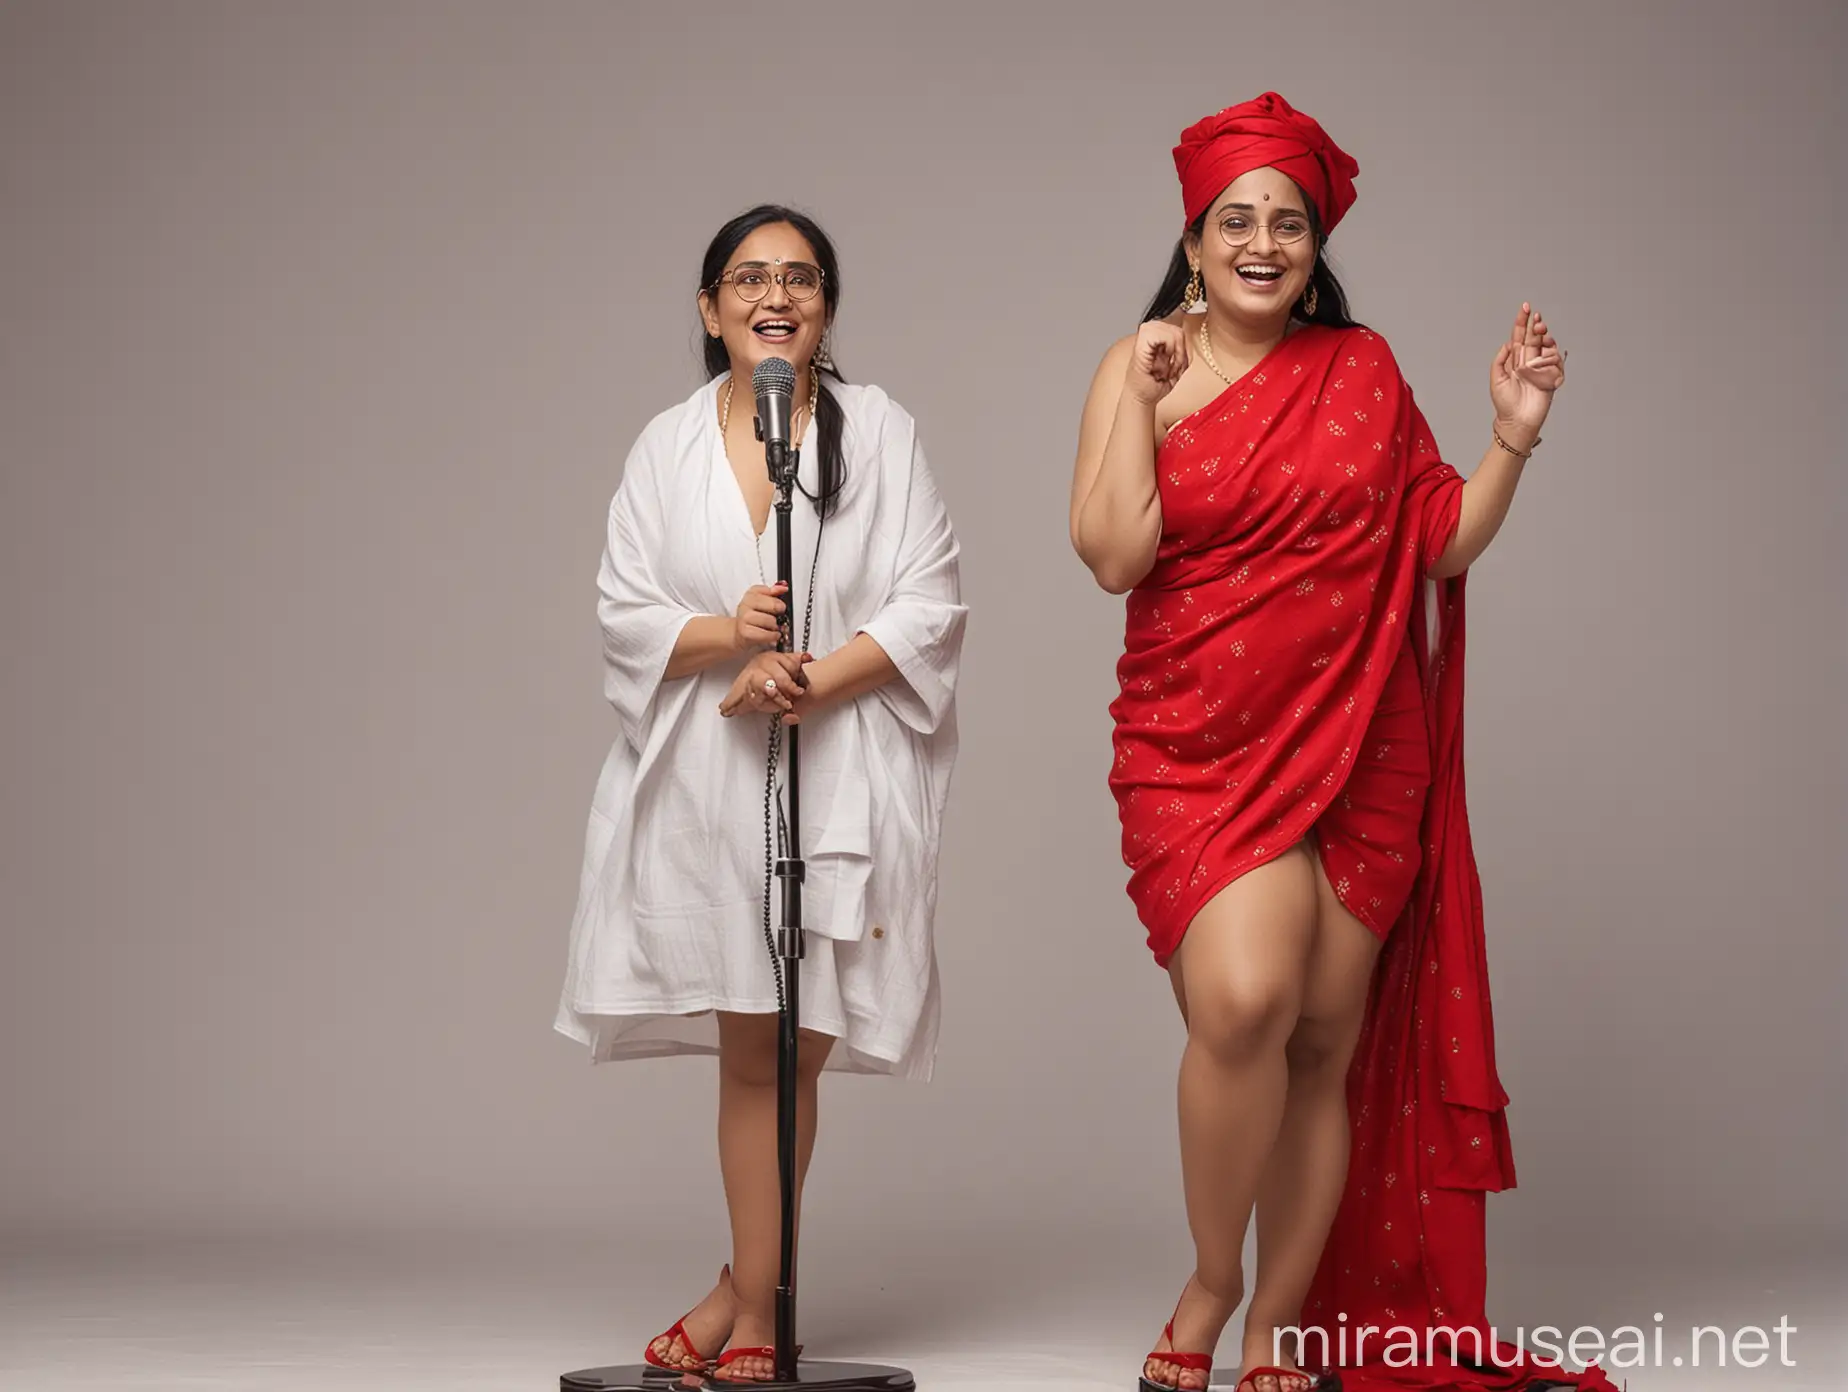 Mature Indian Woman Giving Empowering Speech in Red Bath Towel